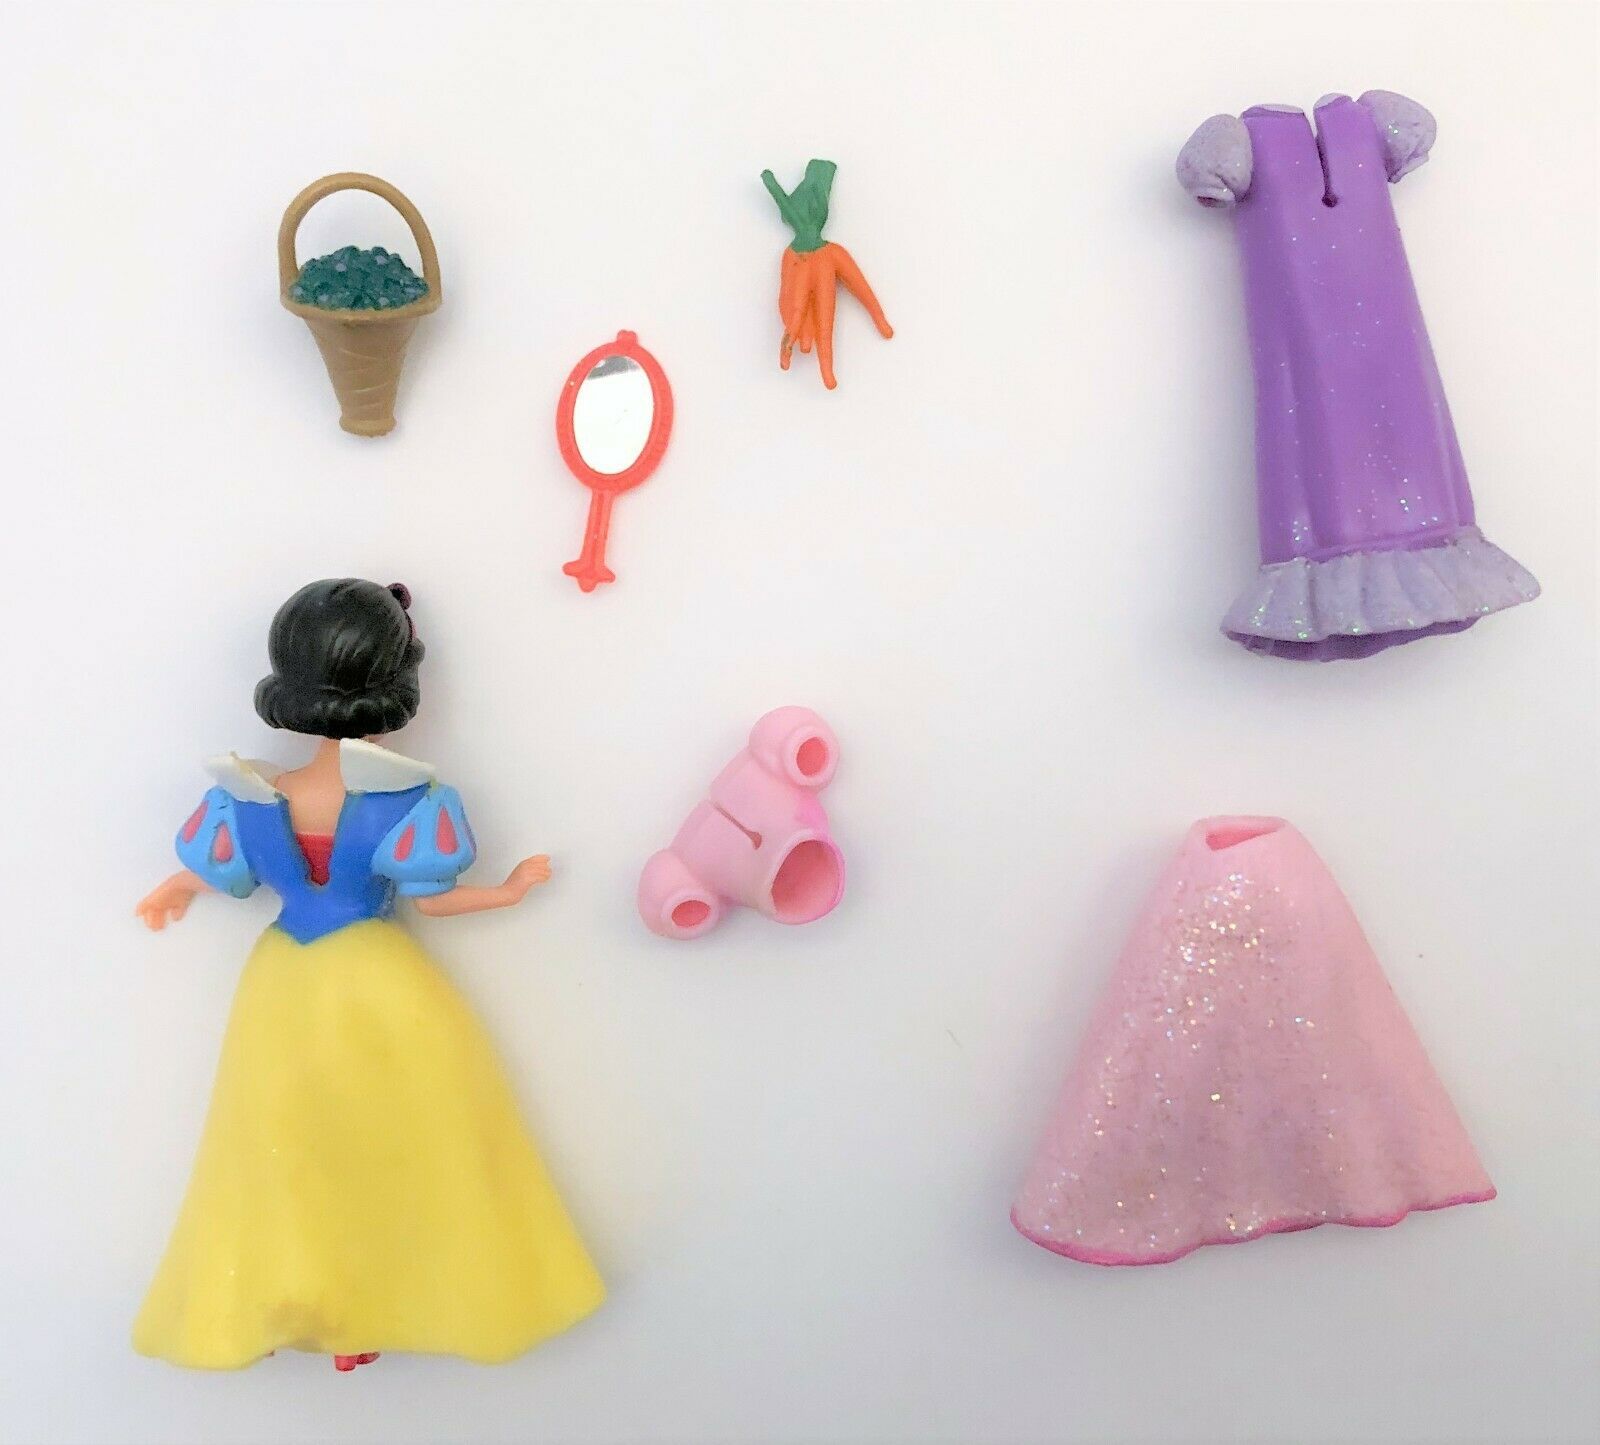 Disney Princess Polly Pocket With Snow White With 3 Dresses And Accessories Polly Pocket 